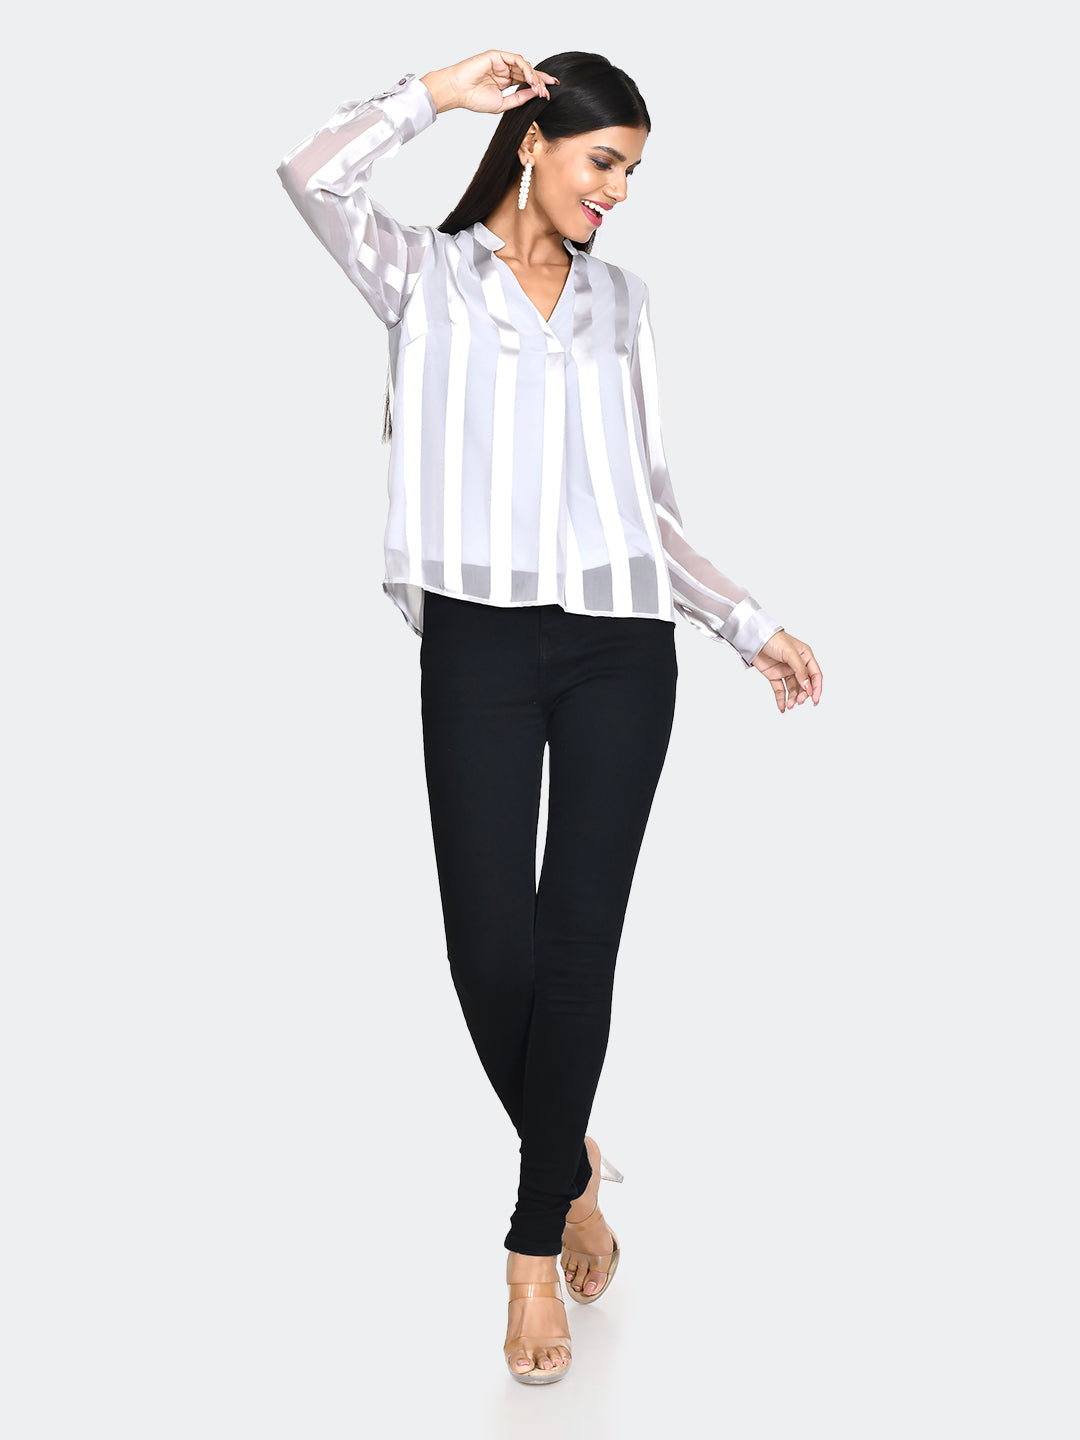 Grey Striped Straight Top For Women